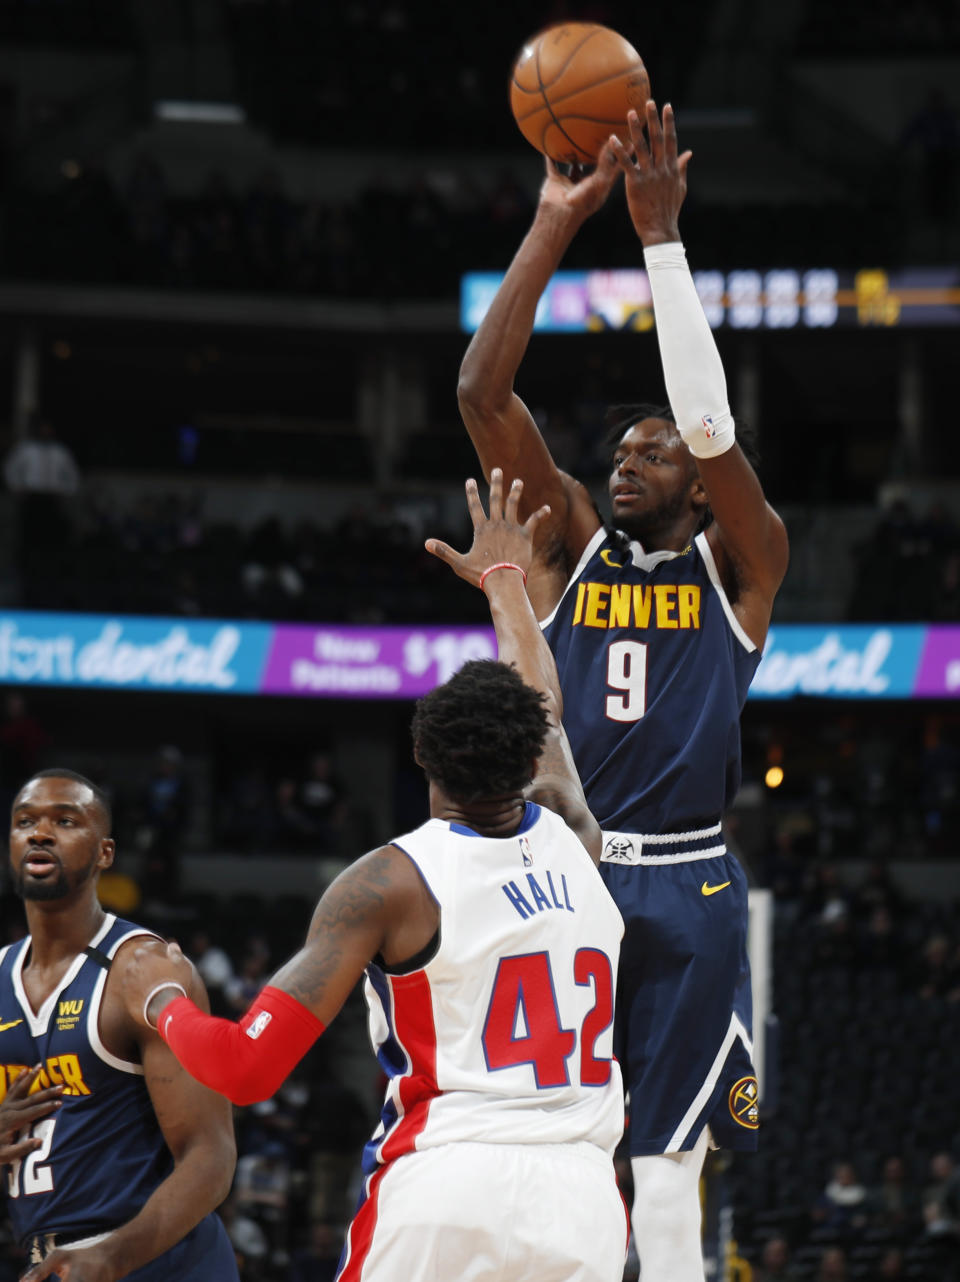 Denver Nuggets forward Jerami Grant, back, shoots over Detroit Pistons center Donta Hall late in the second half of an NBA basketball game Tuesday, Feb. 25, 2020, in Denver. The Nuggets won 115-98. (AP Photo/David Zalubowski)